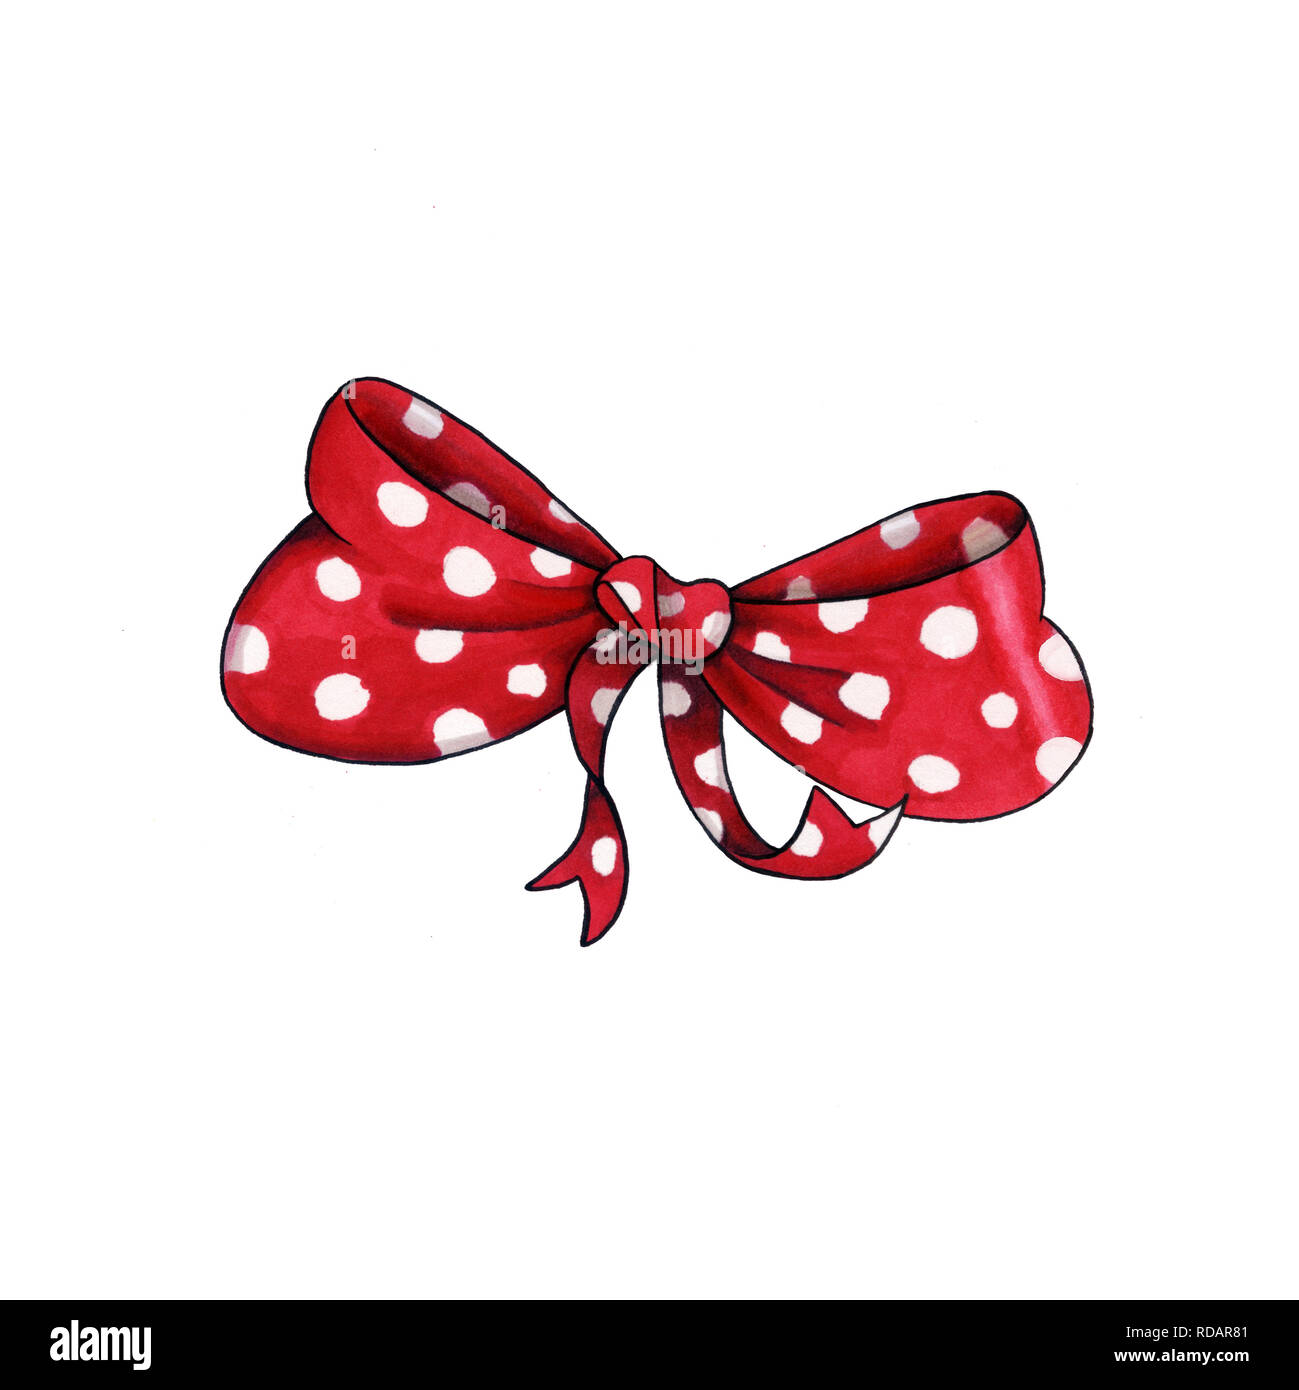 Ribbon knot handdrawn raster illustration. Realistic red polka dots gift bow  drawing. Bowknot clipart. Cartoon bow-tie. Isolated color hairpin. Doodle  hair accessory. Banner, poster, greeting card design element Stock Photo -  Alamy